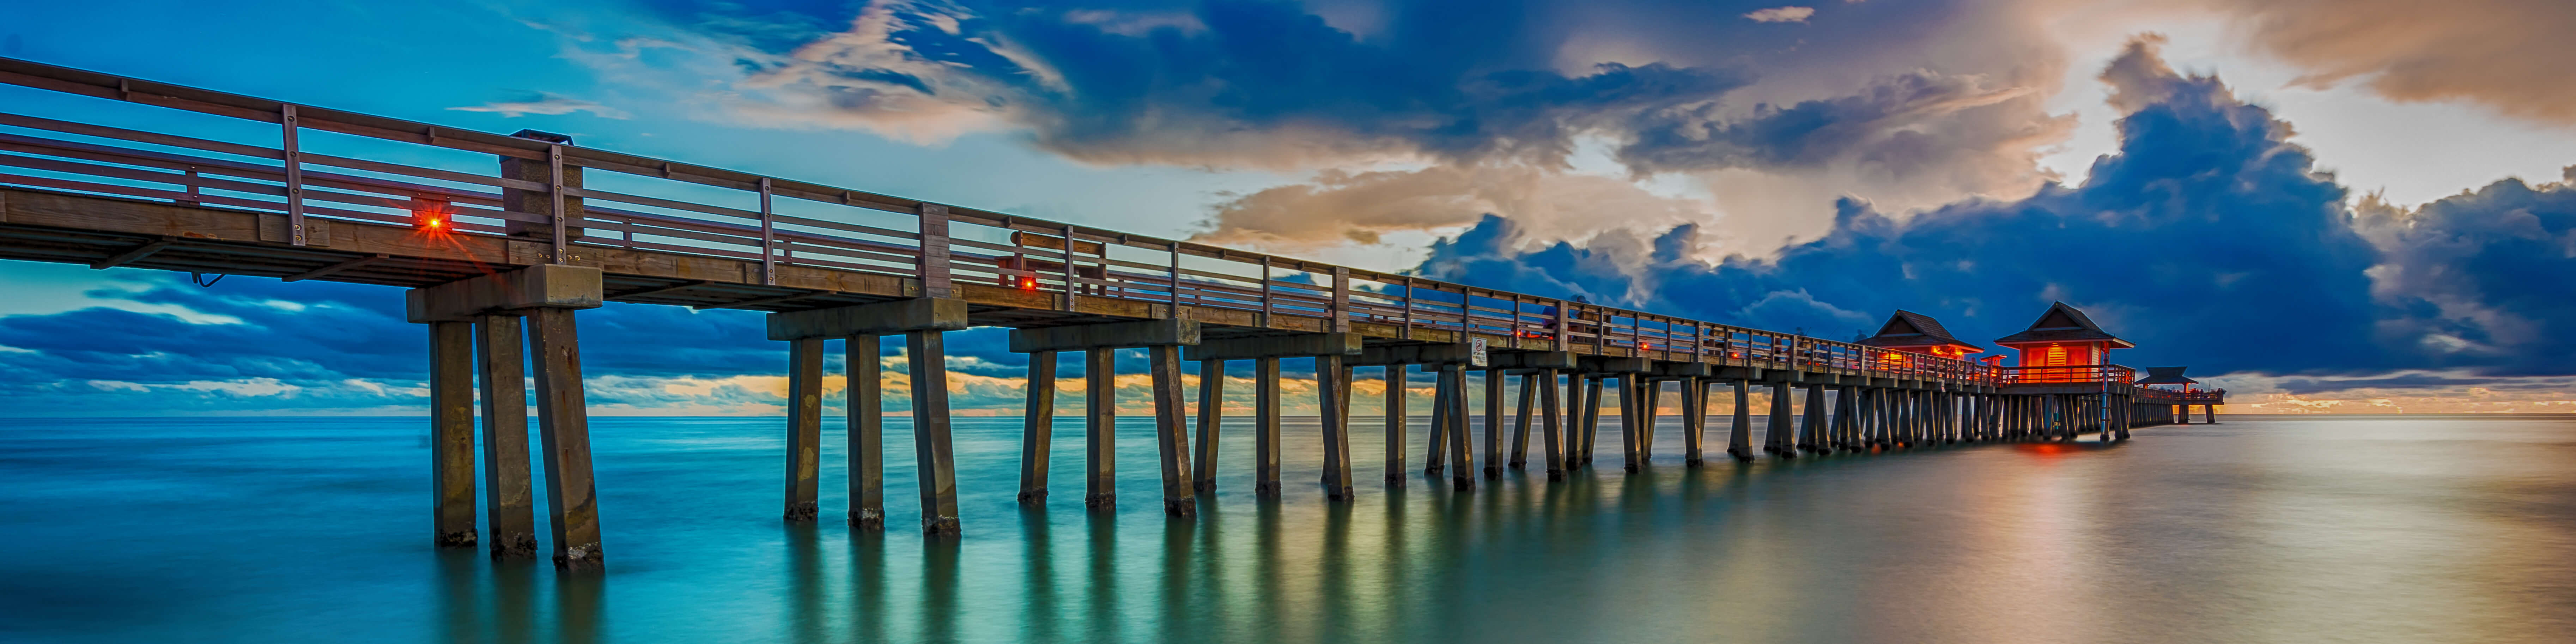 image of Florida pier on our continuing education chiropractic page